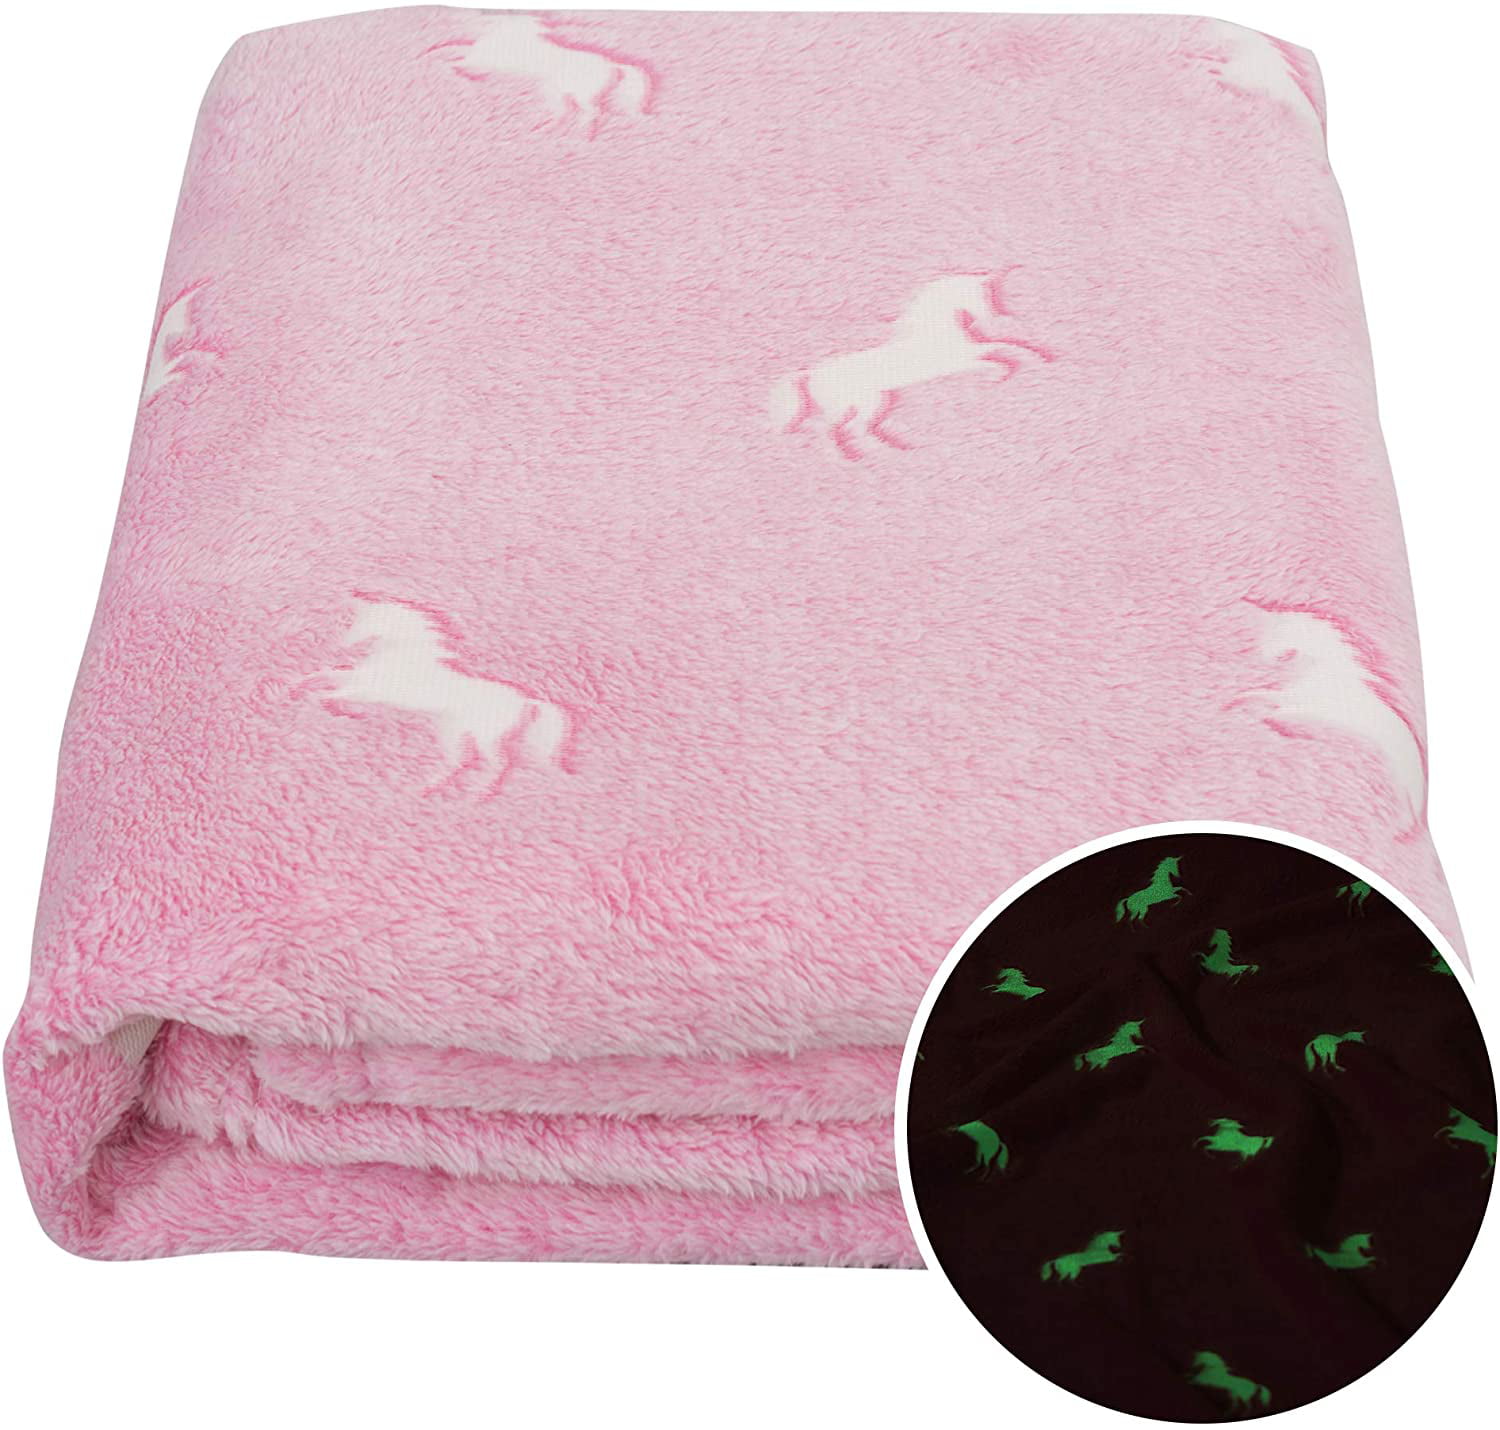 Details about   Glow in The Dark Throw Blanket Super Soft Fuzzy Plush Fleece,Decorated with Sta 